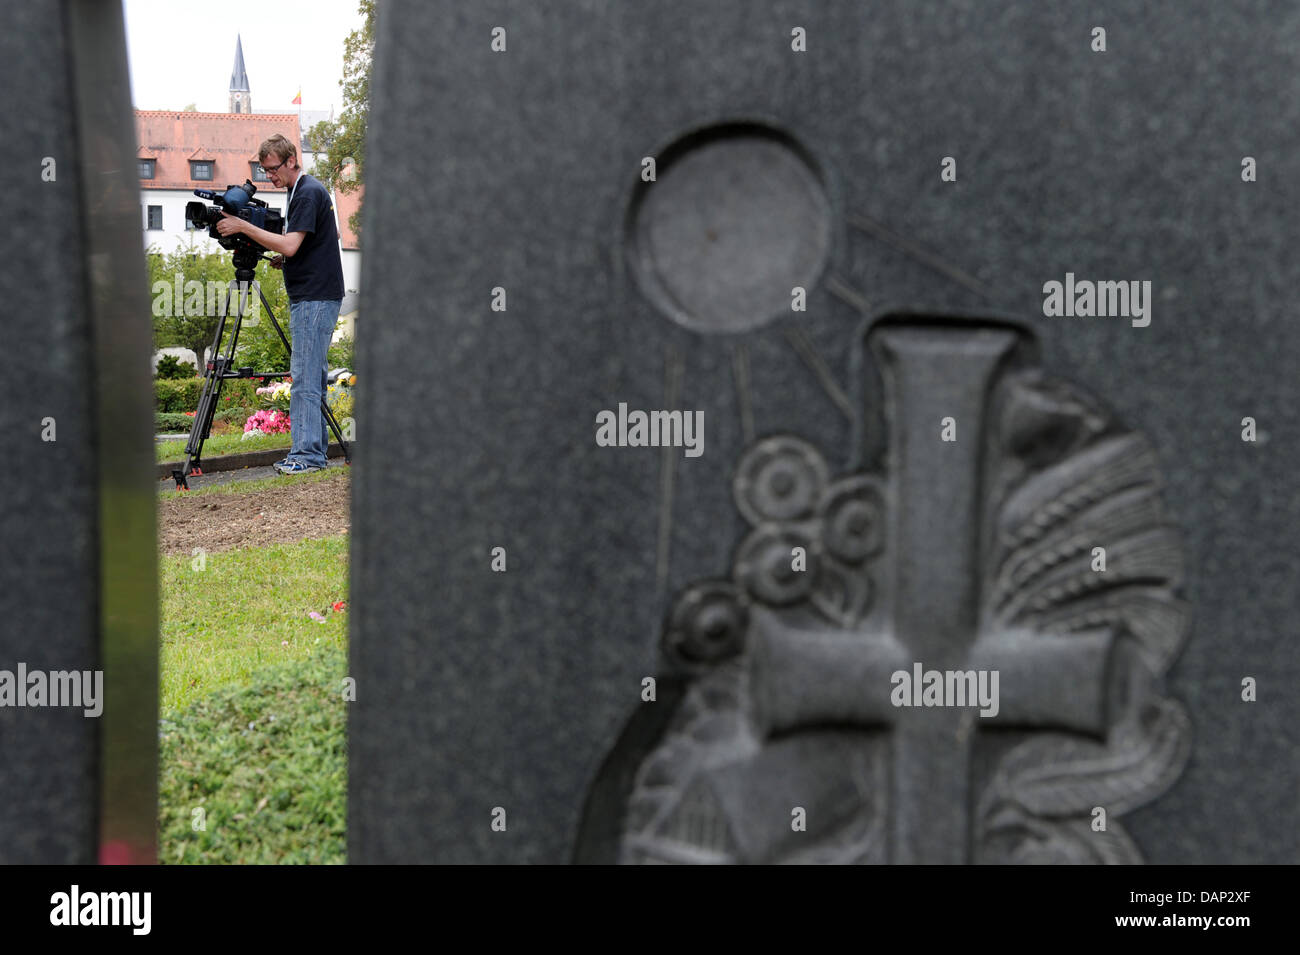 A camera man films the spot, where the grave of Adolf Hitler's Deputy Rudolf Hess (1894-1987) was previously situated at the cemetery in Wunsiedel, Germany, 21 July 2011. For more than two decades, the grave was a place of pilgrimmage for neo-nazis and right-wing extremists. The remains of Rudolf Hesse have been exhumed and his grave destroyed. Hess's remains are to be cremated and Stock Photo